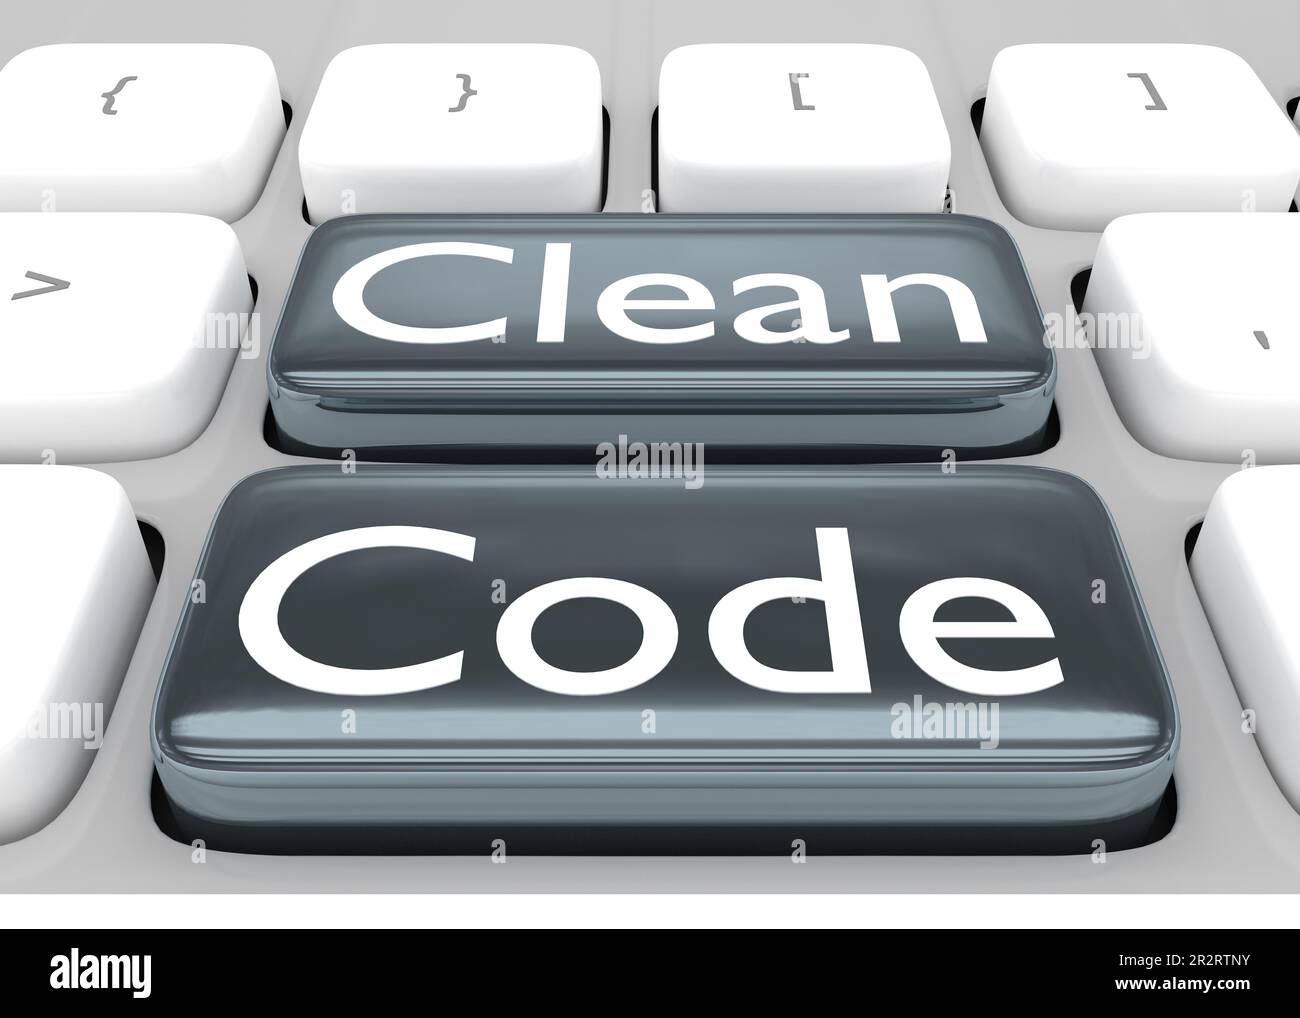 3D illustration of computer keyboard with the script Clean Code on two gray buttons. Stock Photo